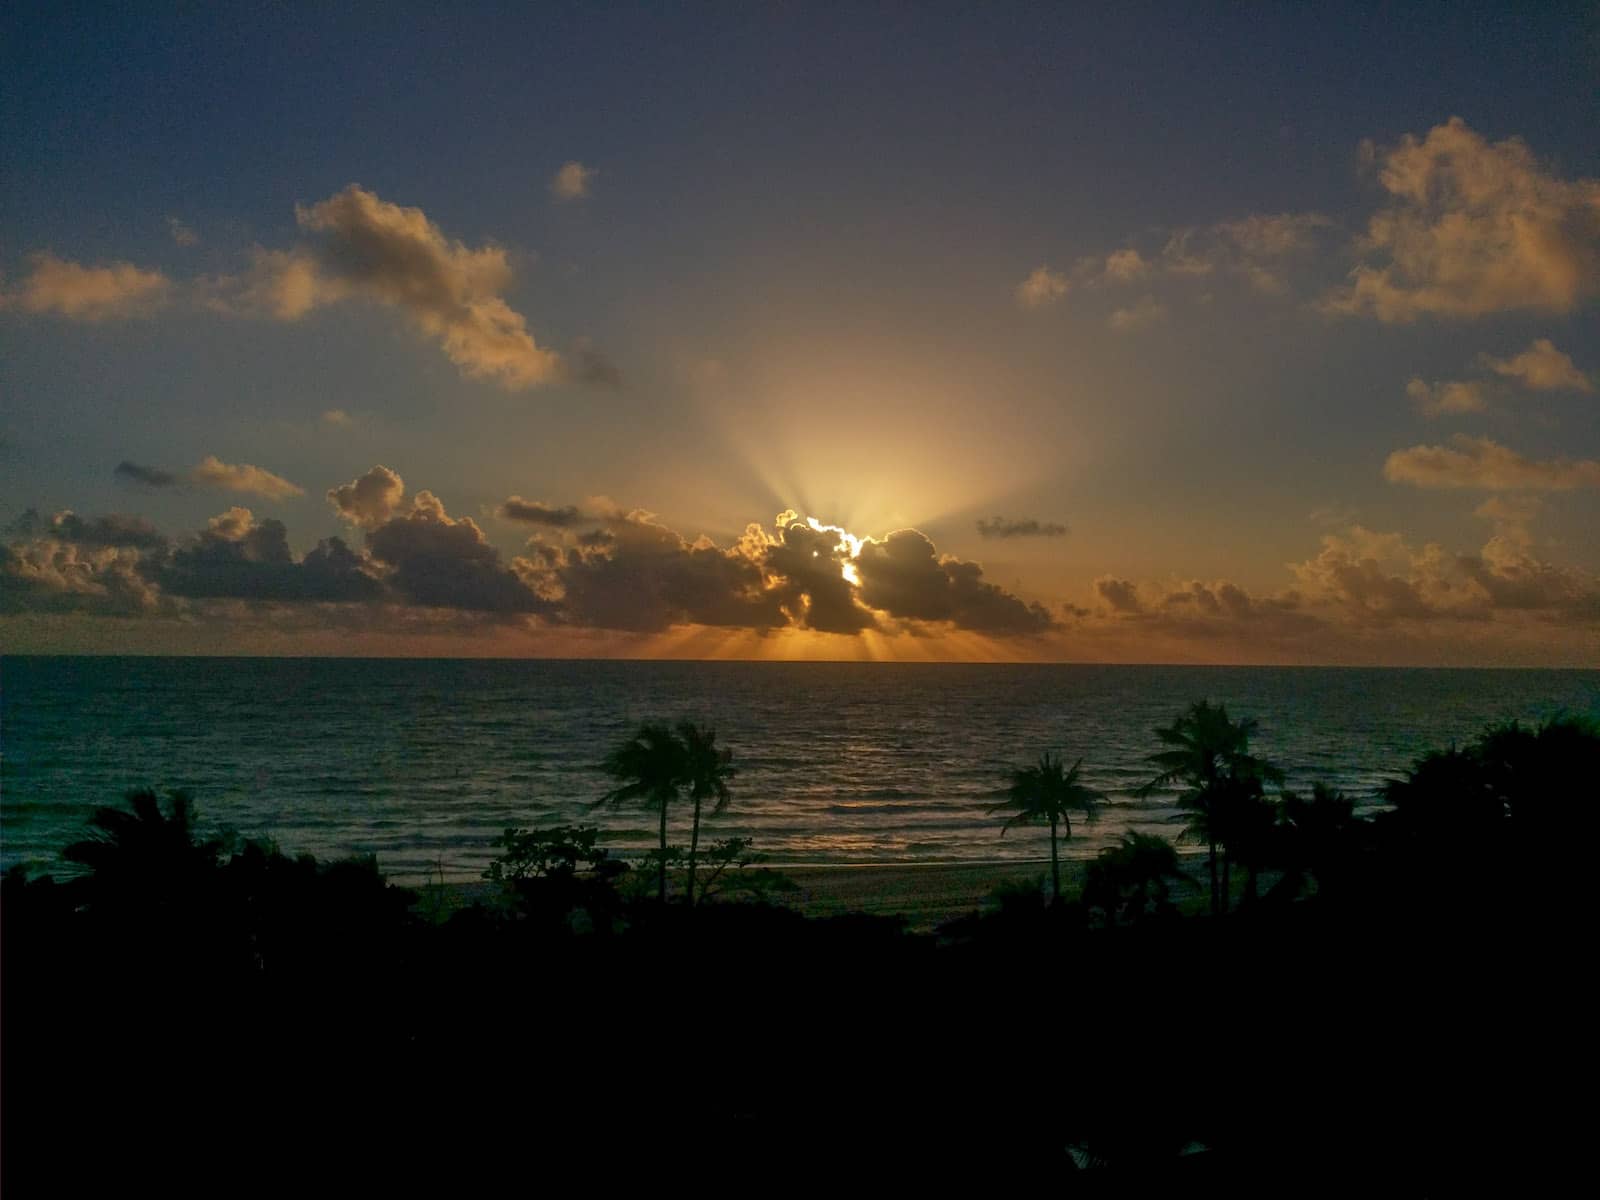 The sunrise over Bal Harbour